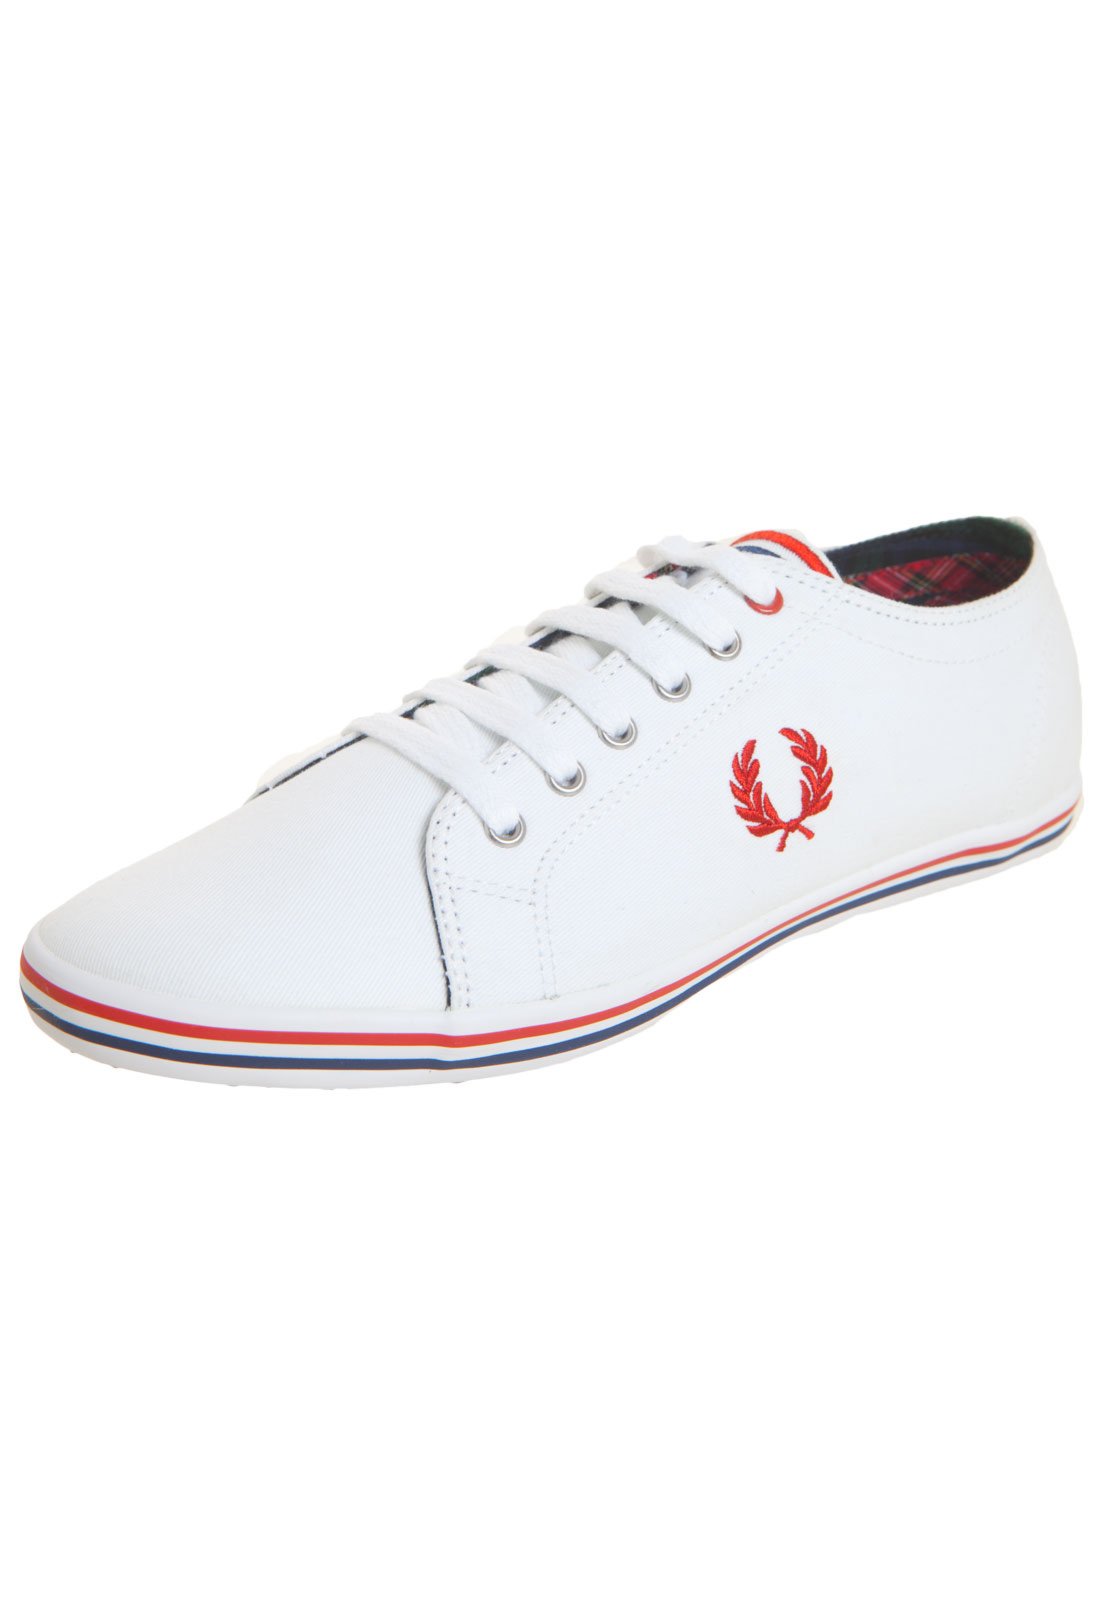 sapatenis fred perry